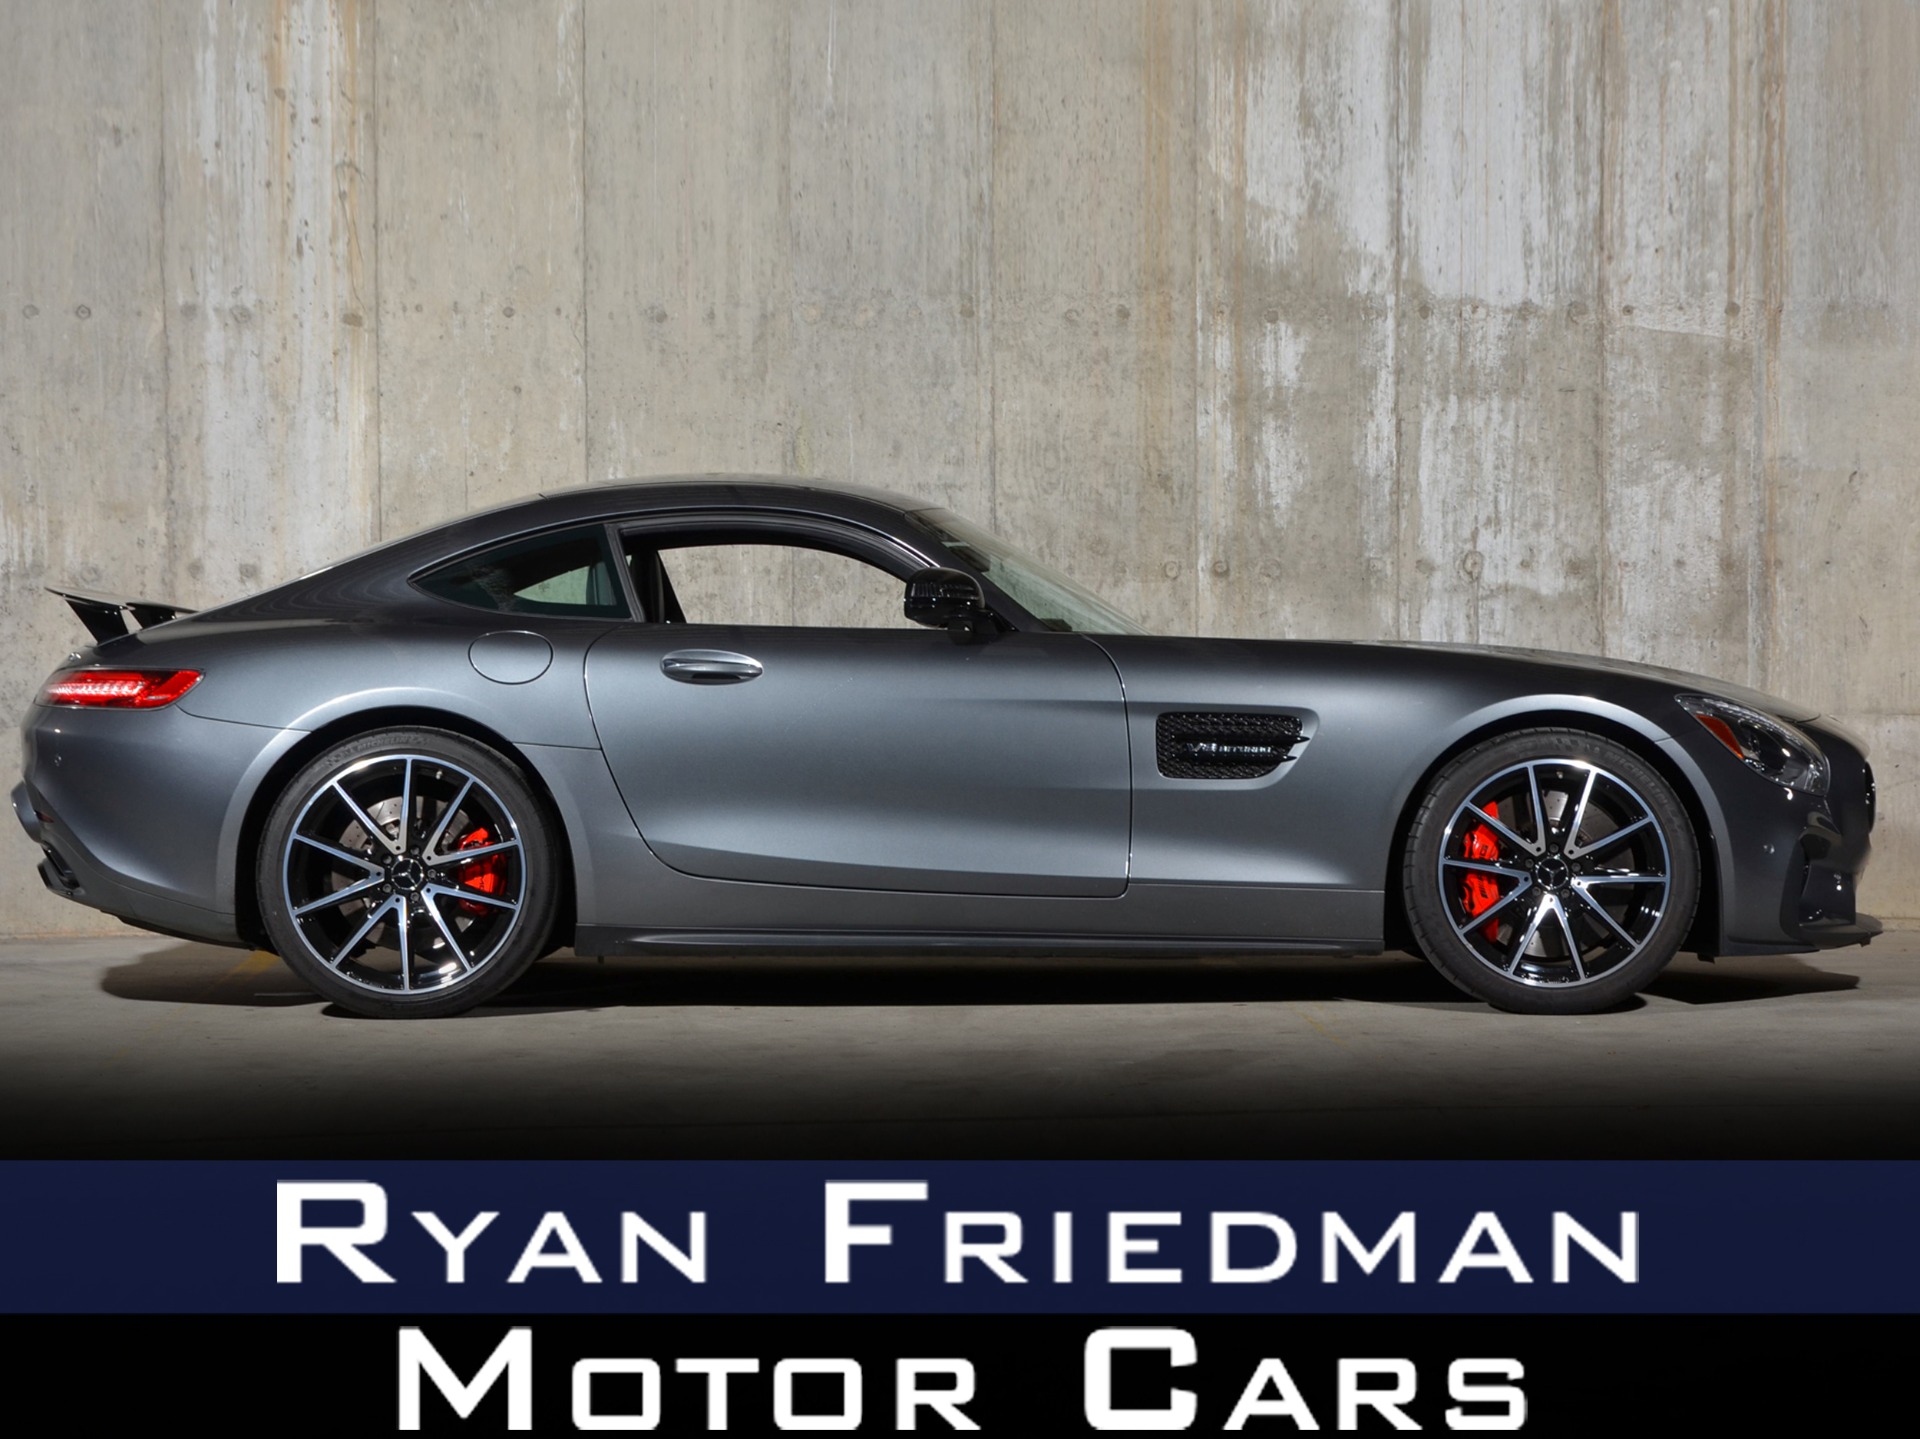 Used Mercedes Benz Amg Gt S Edition For Sale Sold Ryan Friedman Motor Cars Llc Stock